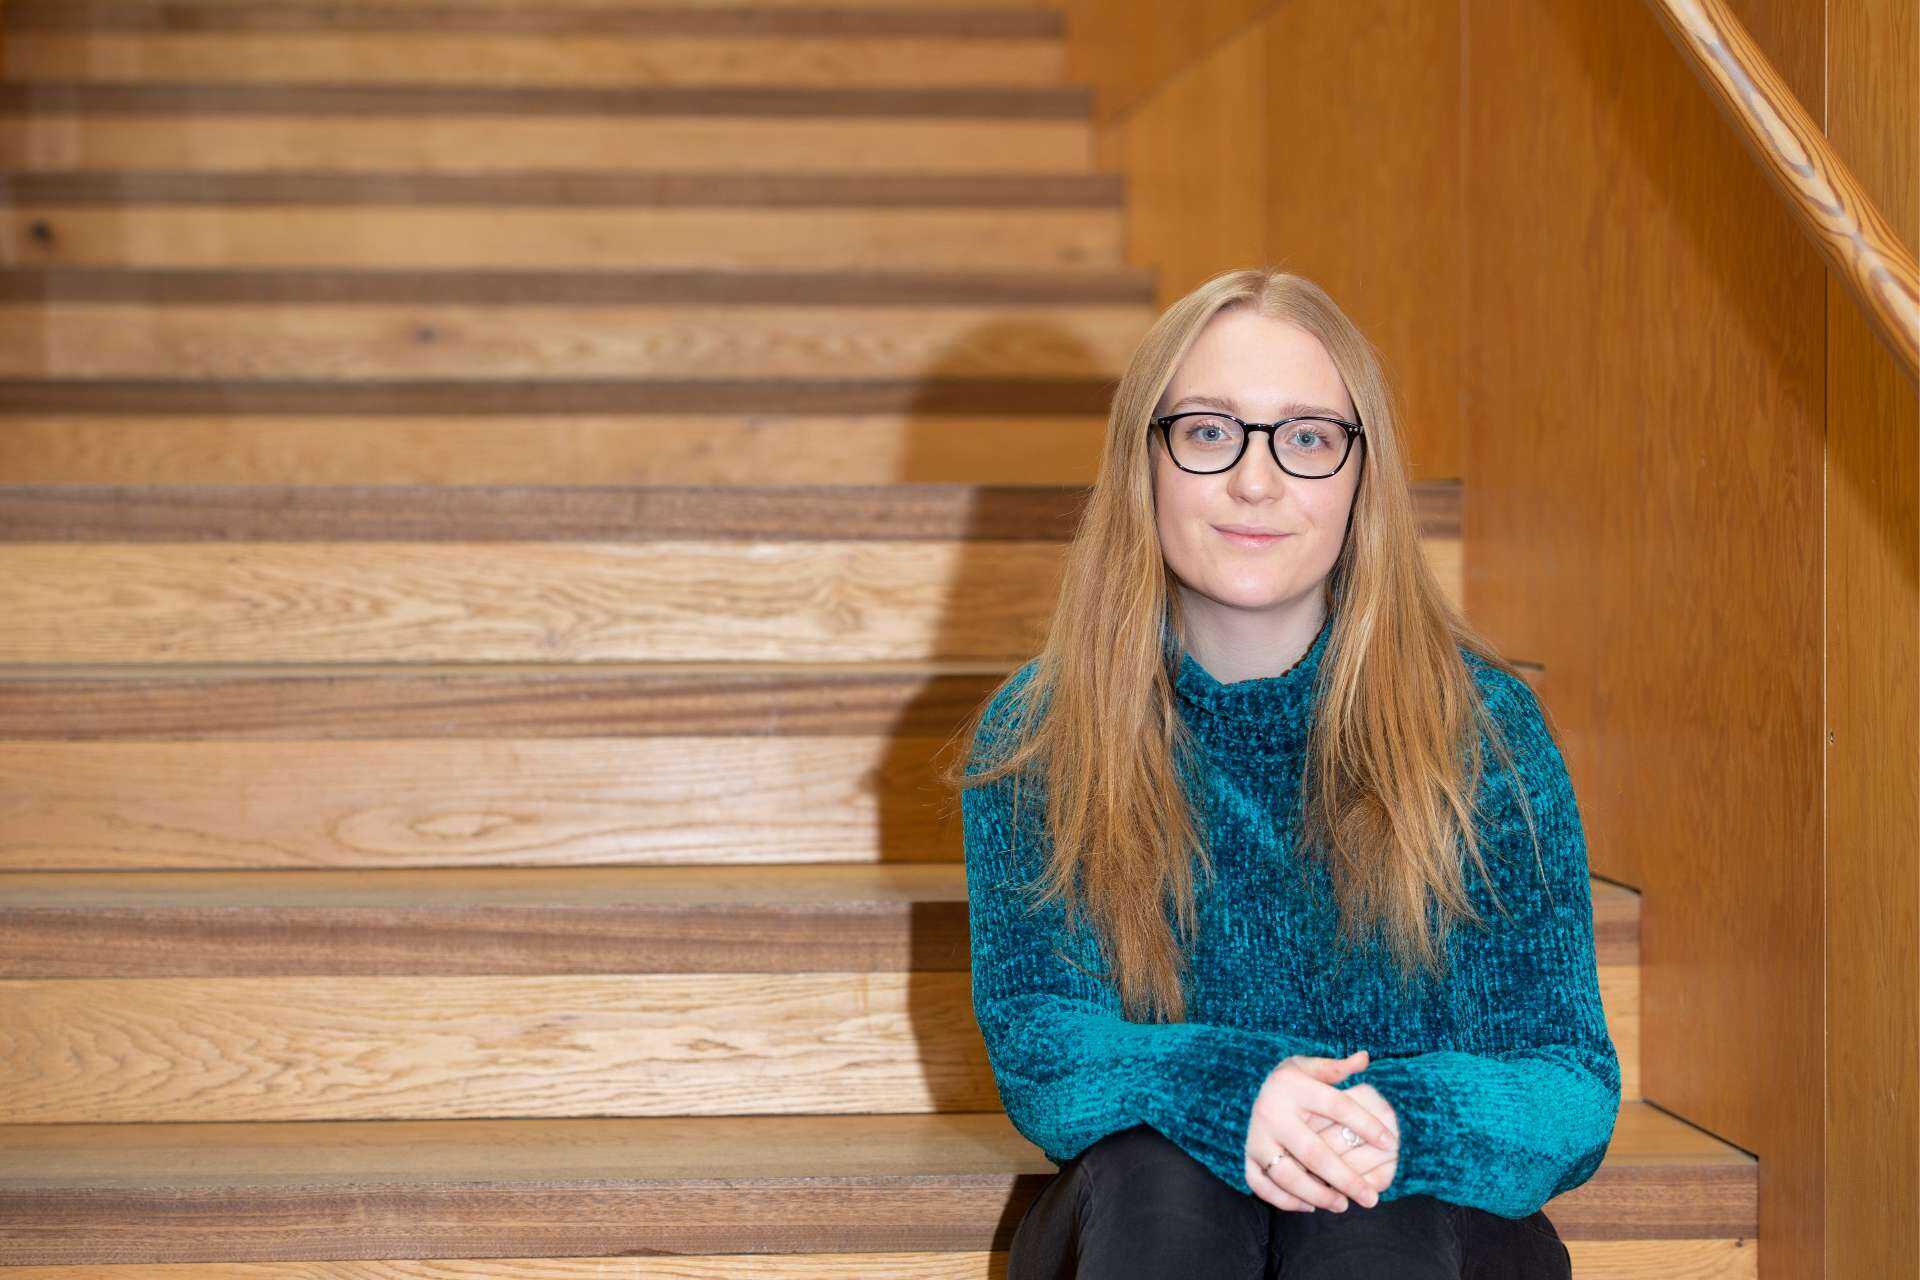 Shauna sits on a wooden staircase, wearing a teal jumper and black glasses.